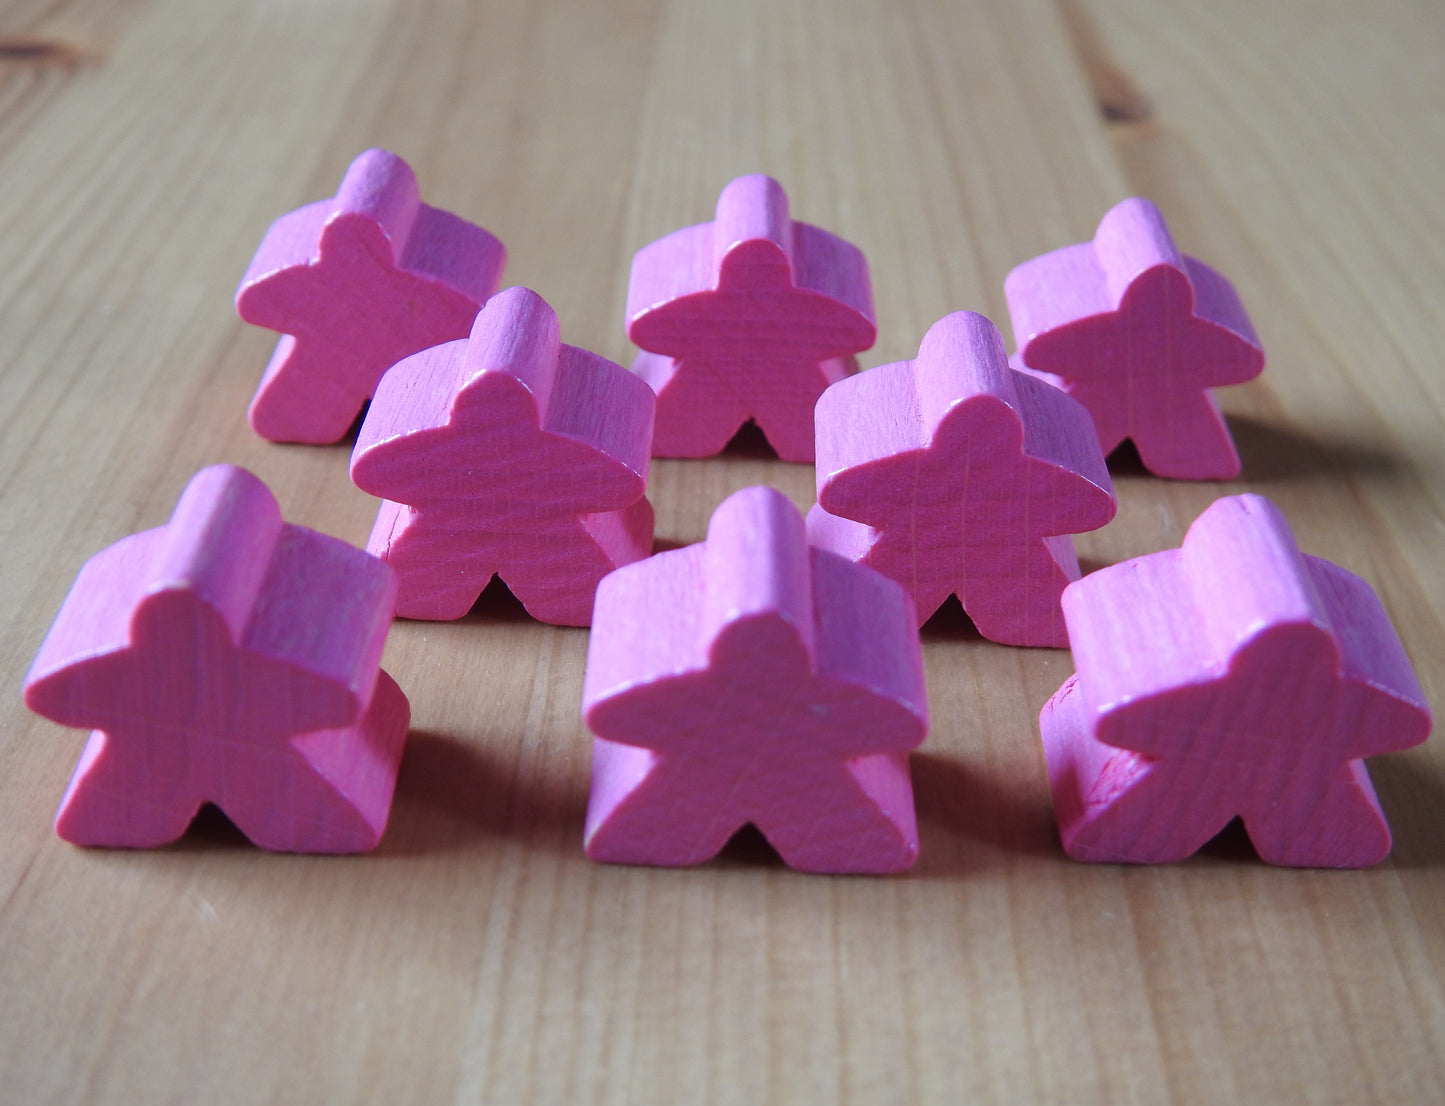 Close-up view of the pink set of 8 meeples.